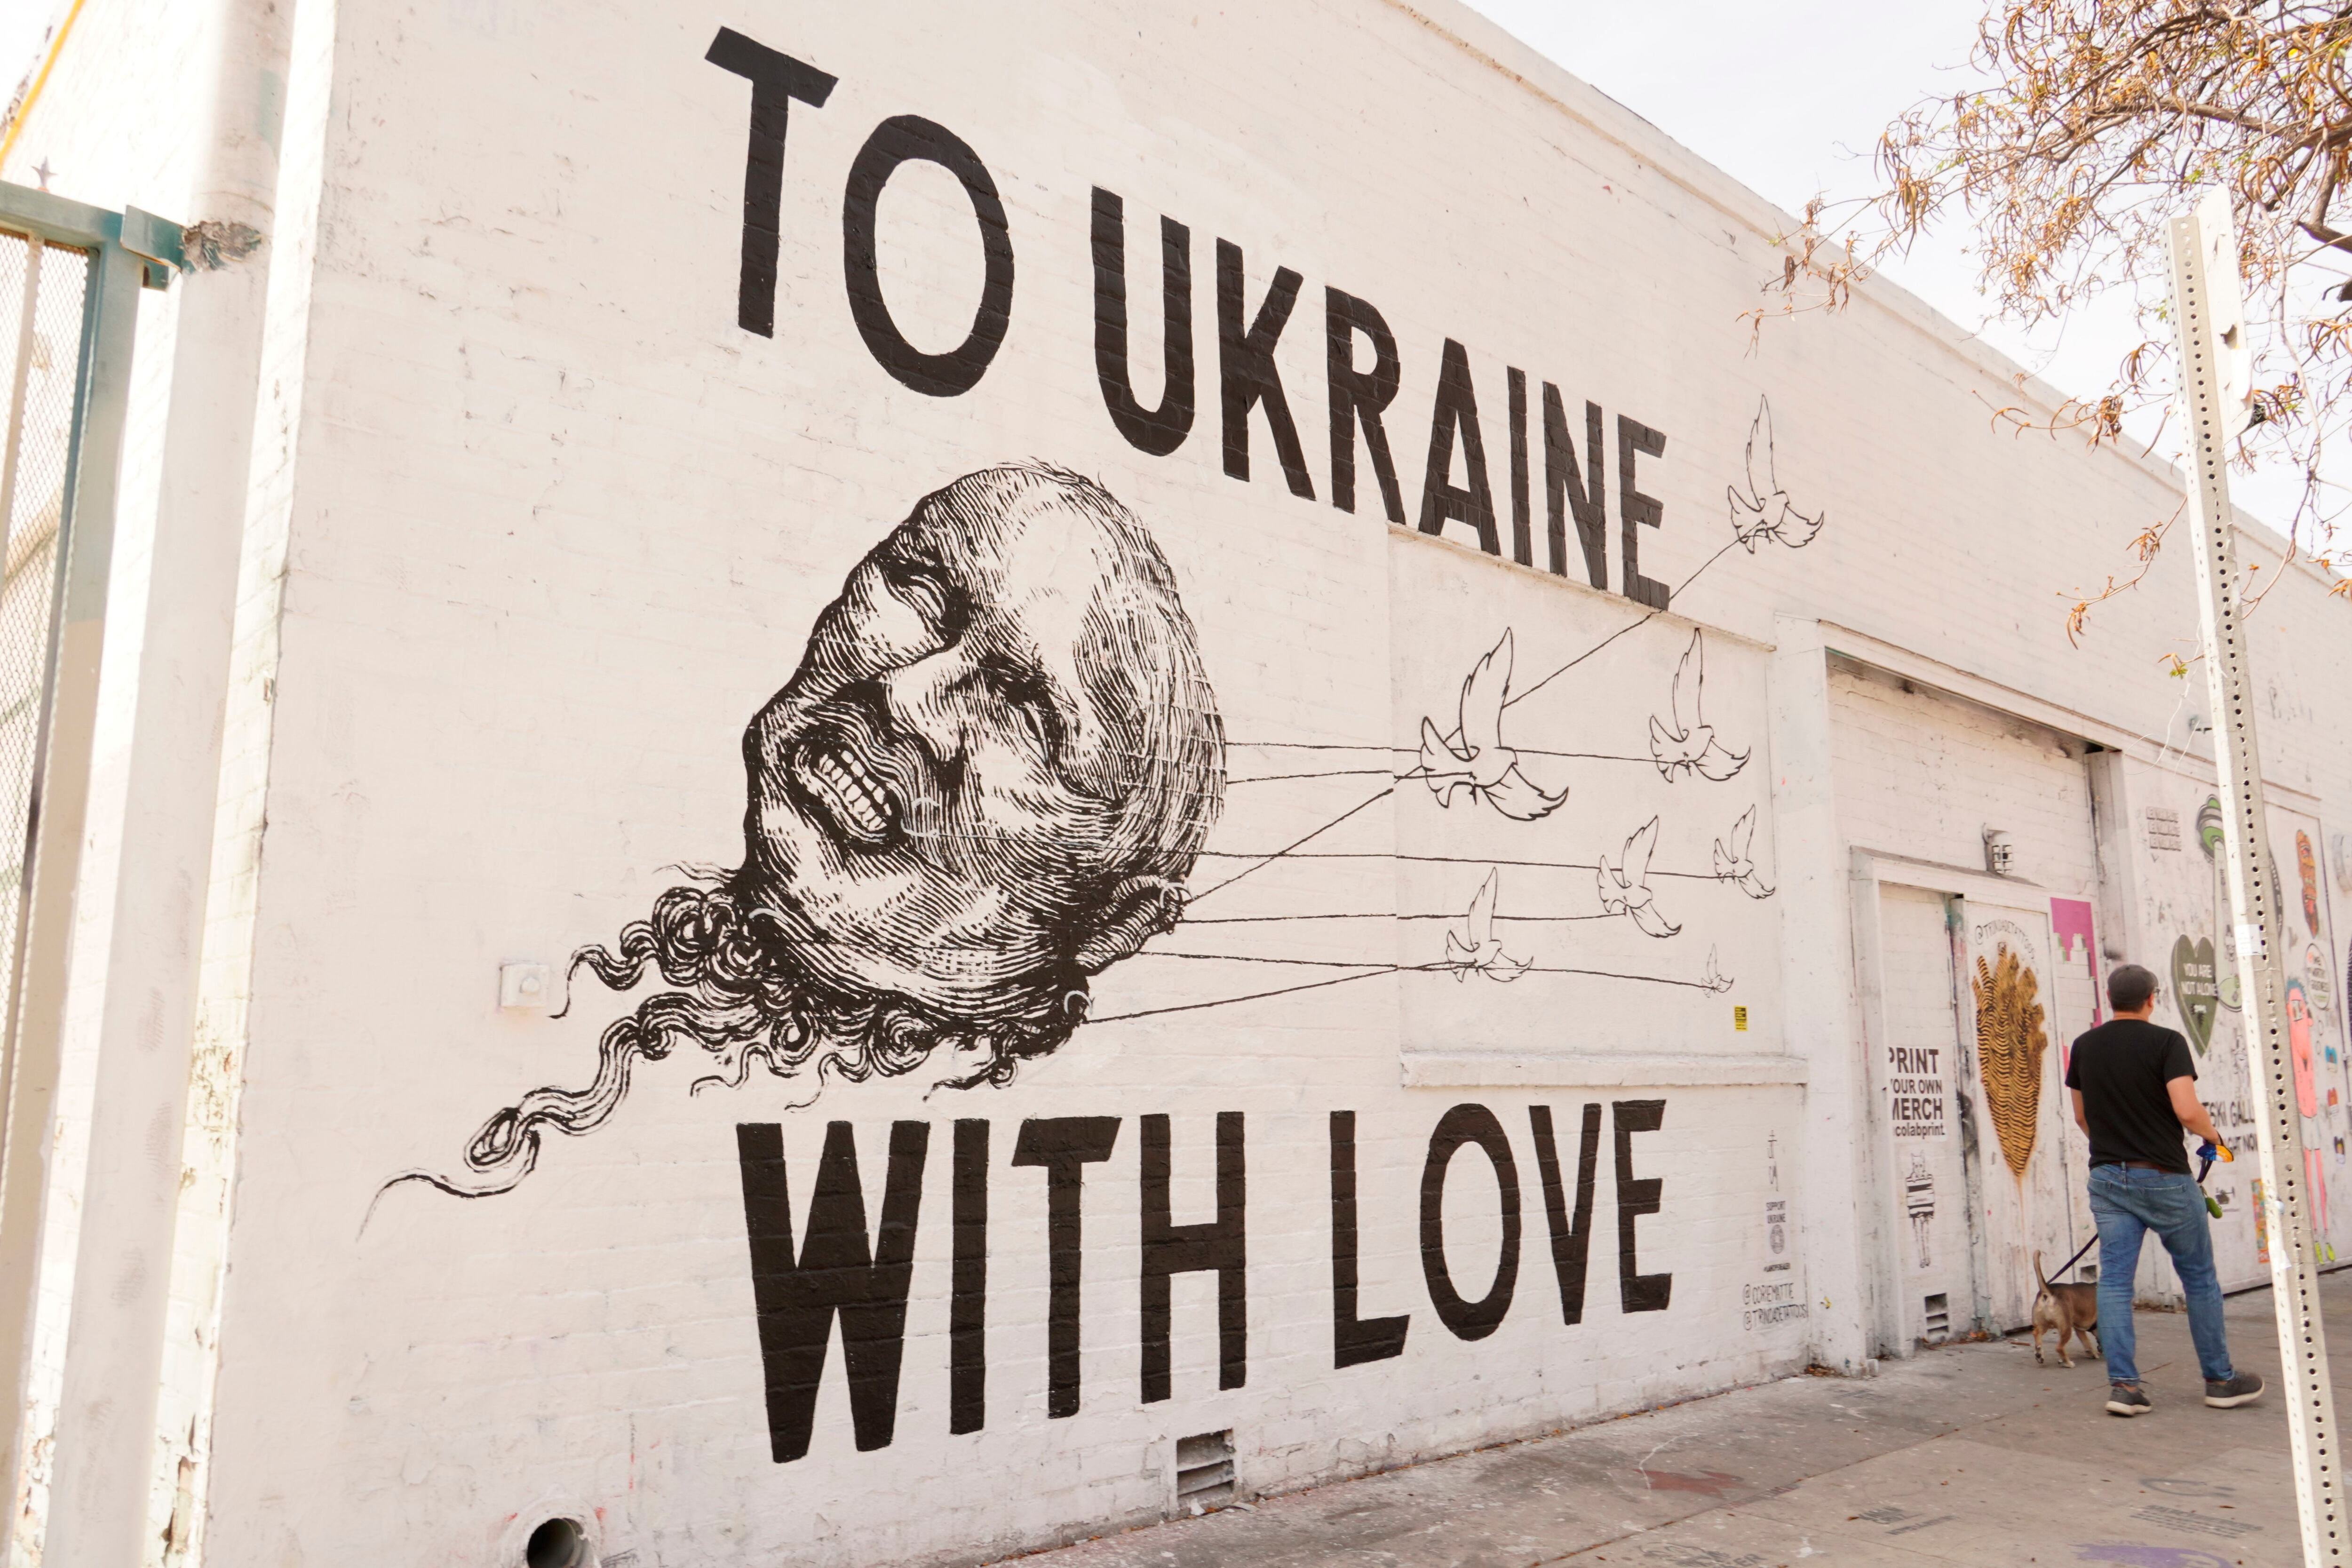 Spray-painting for Ukraine: Street artists show support